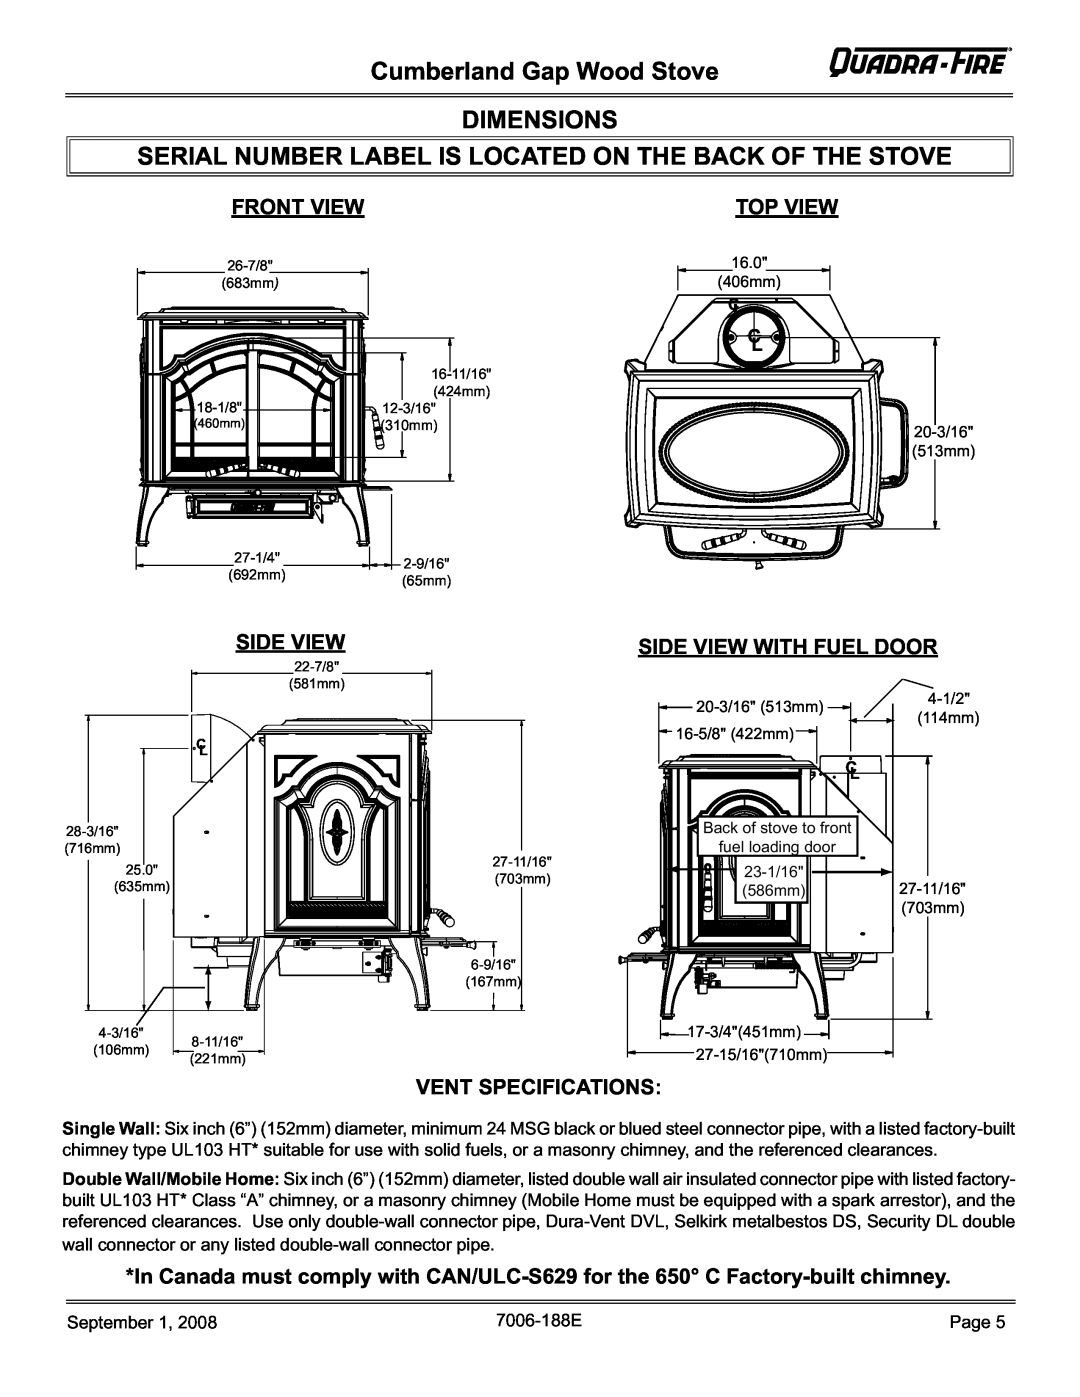 Hearth and Home Technologies CUMBGAP-PMH Cumberland Gap Wood Stove DIMENSIONS, Front View, Top View, Side View 